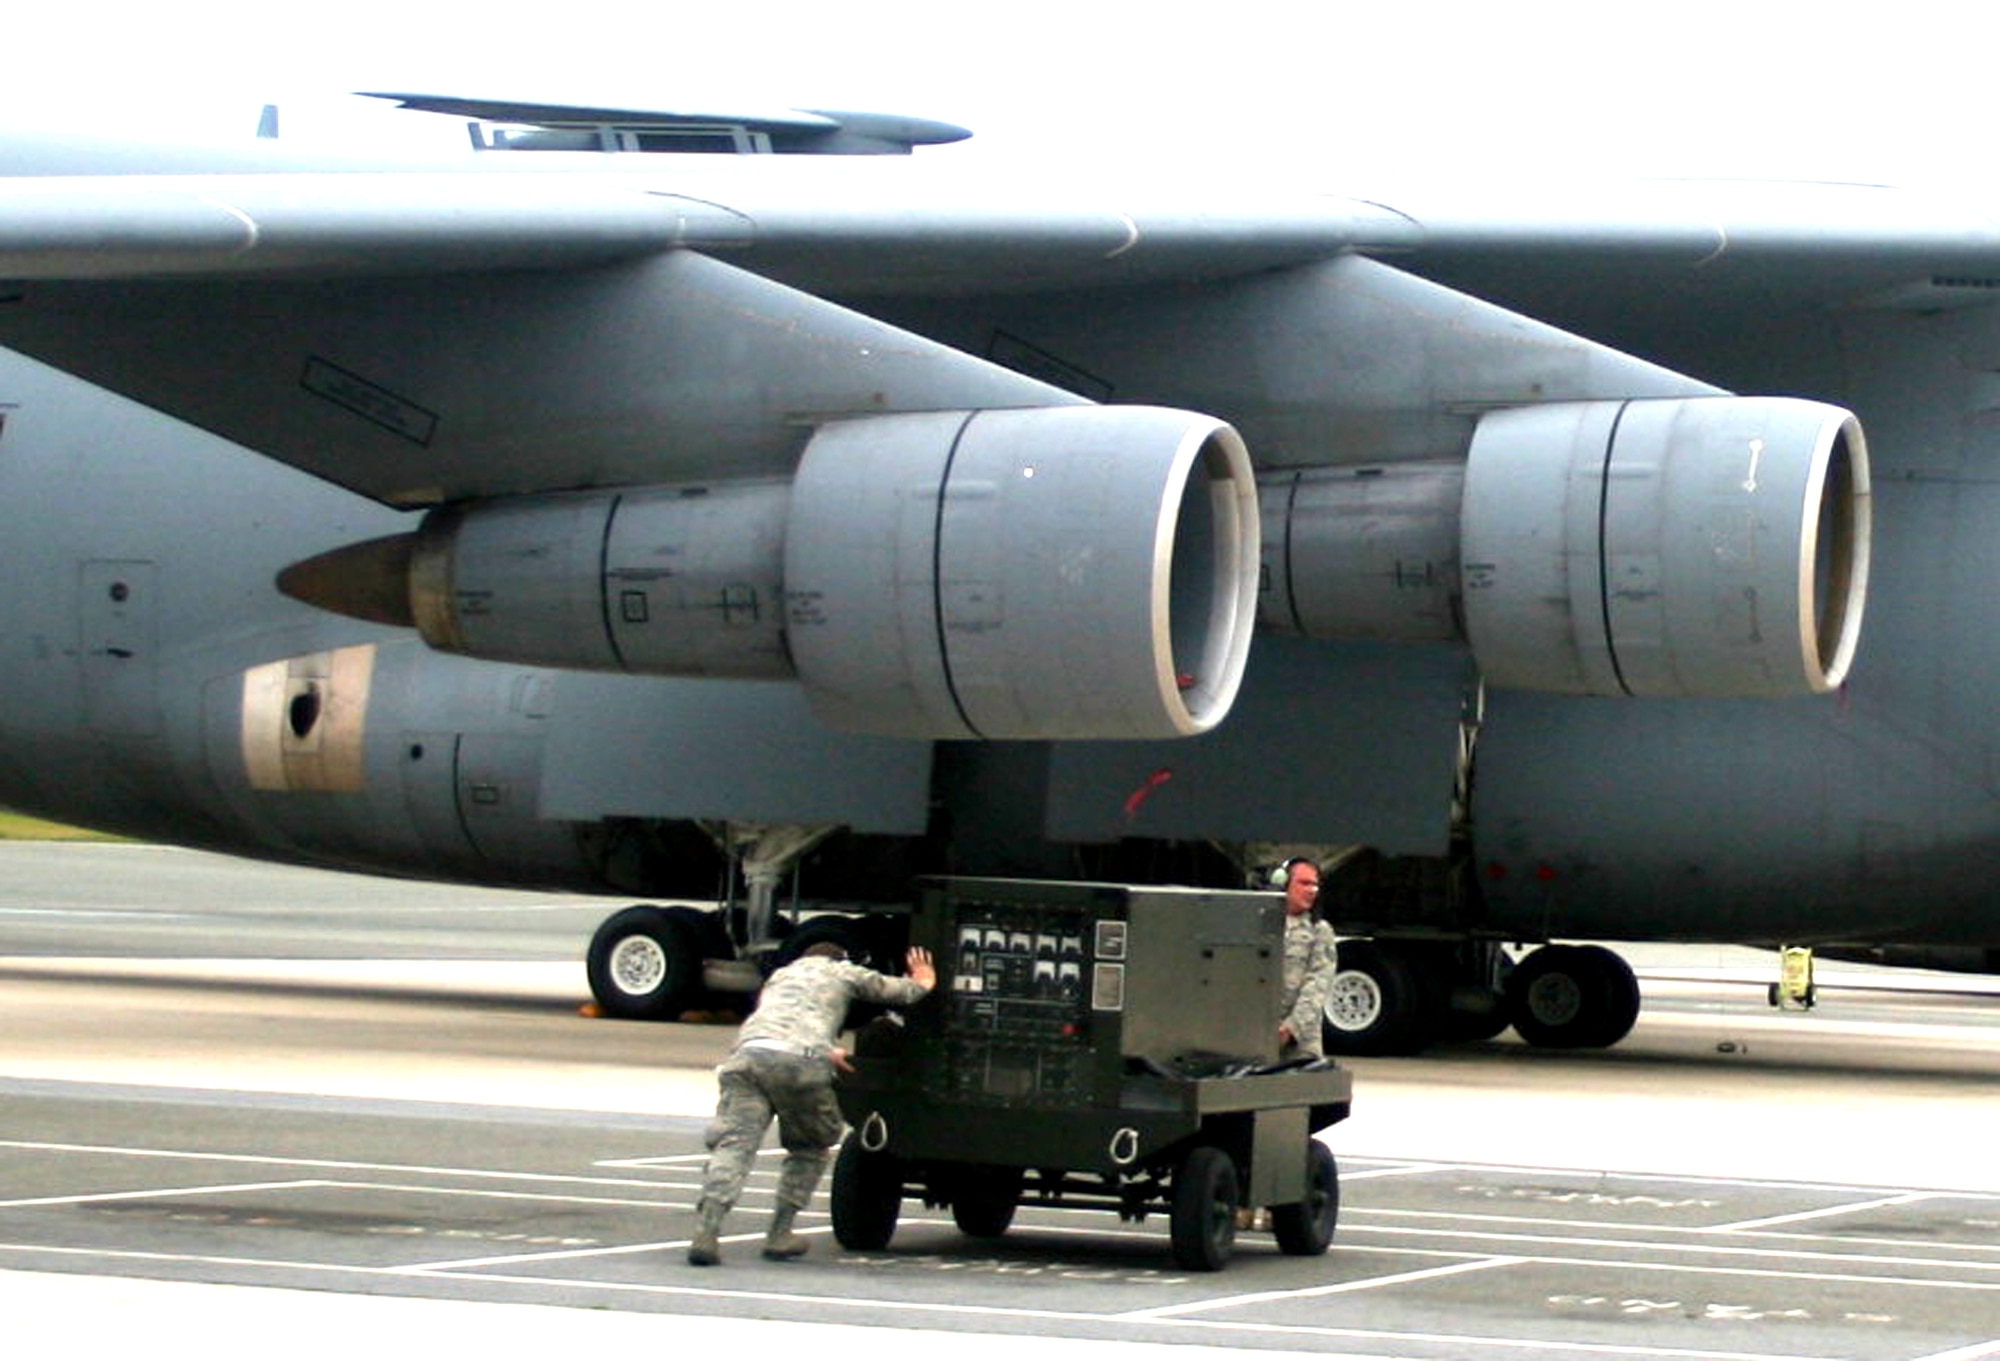 Airmen from the 436th Aircraft Maintenance Squadron work on the flightline at Dover Air Force Base, Del., while preparing a C-5M Super Galaxy for a mission June 5, 2011. The work was done prior to the plane's departure for a direct delivery airlift mission through the Arctic Circle from Dover Air Force Base, Del., to Bagram Airfield, Afghanistan. (U.S. Air Force Photo/Master Sgt. Scott T. Sturkol)